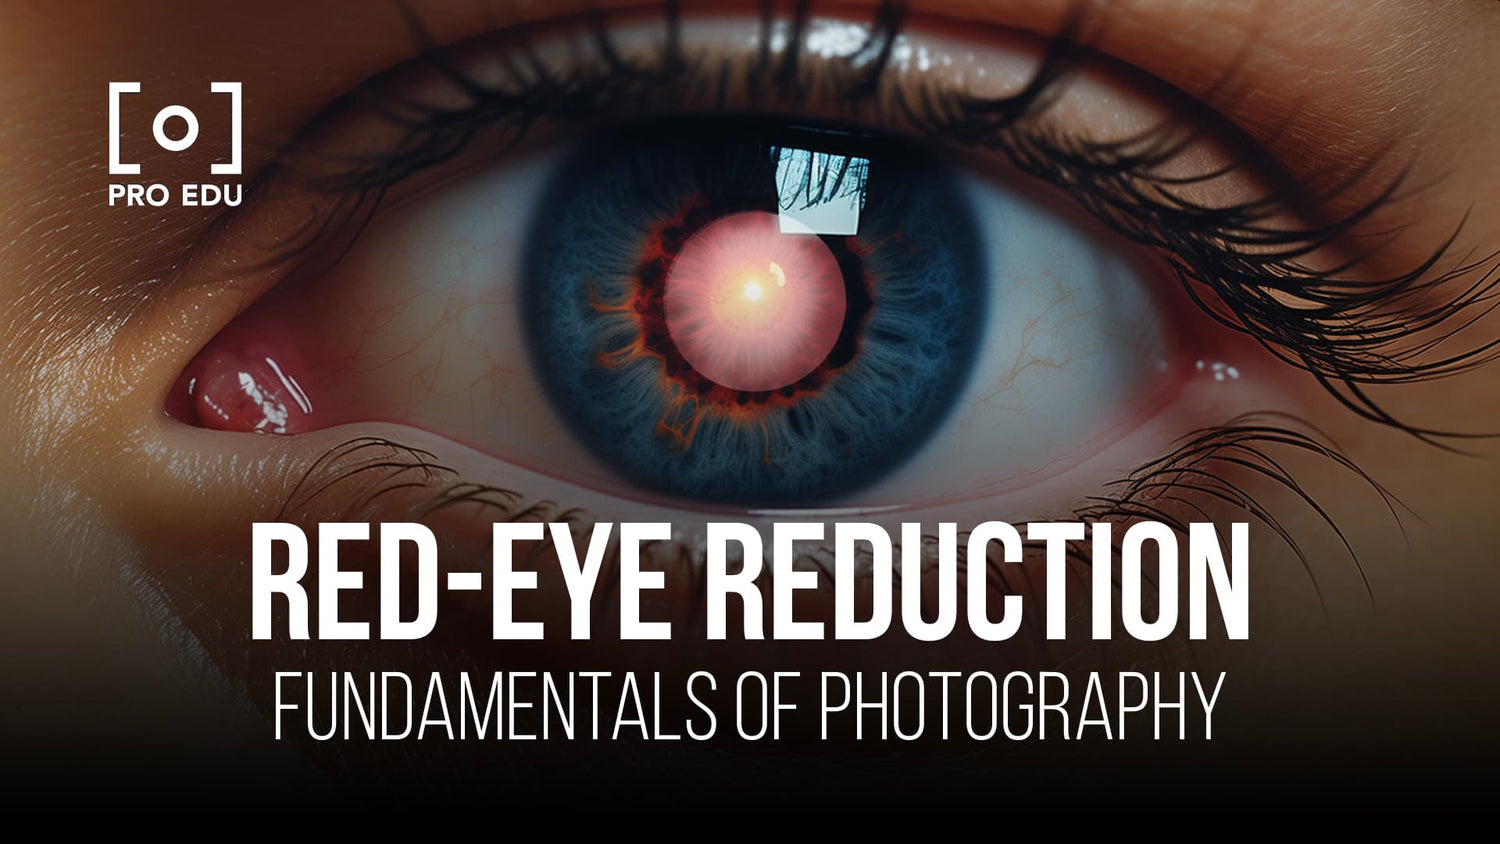 Techniques and tips for reducing red-eye in photography, improving portrait quality